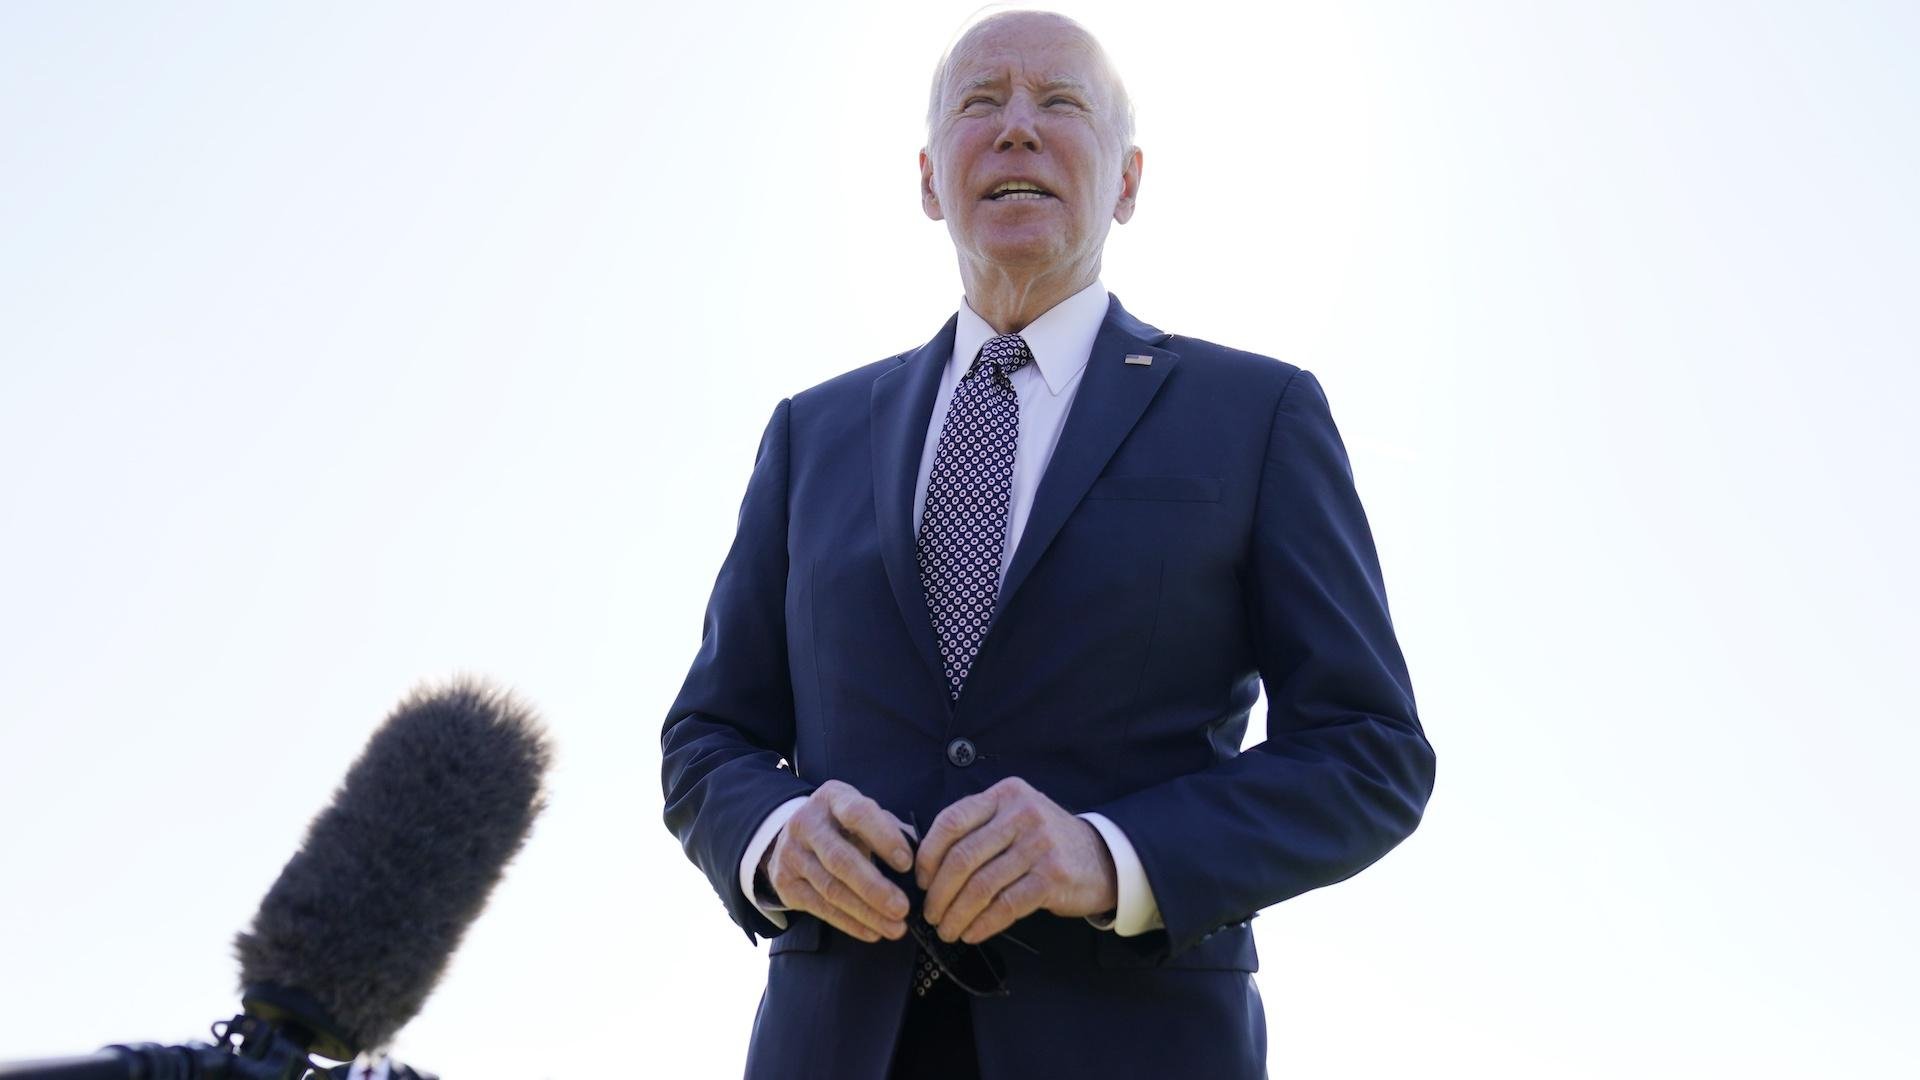 President Joe Biden speaks to the media at Fort Lesley J. McNair, Monday, April 4, 2022, as he returns to Washington and the White House after spending the weekend in Wilmington, Del. (AP Photo/Andrew Harnik)